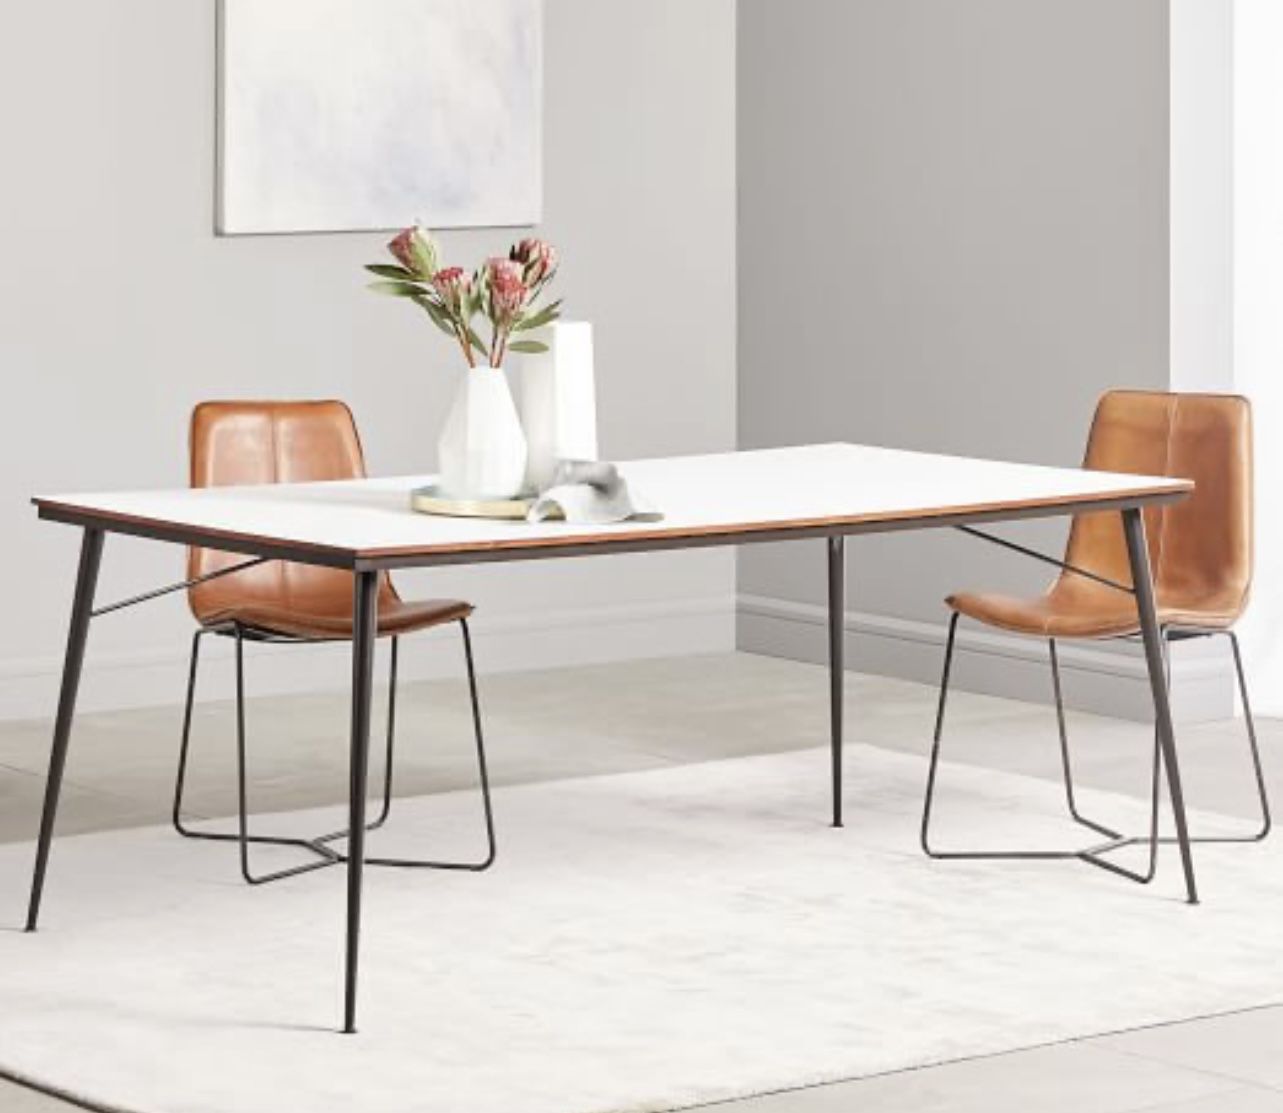 Beautiful West Elm Paulson Dining Table